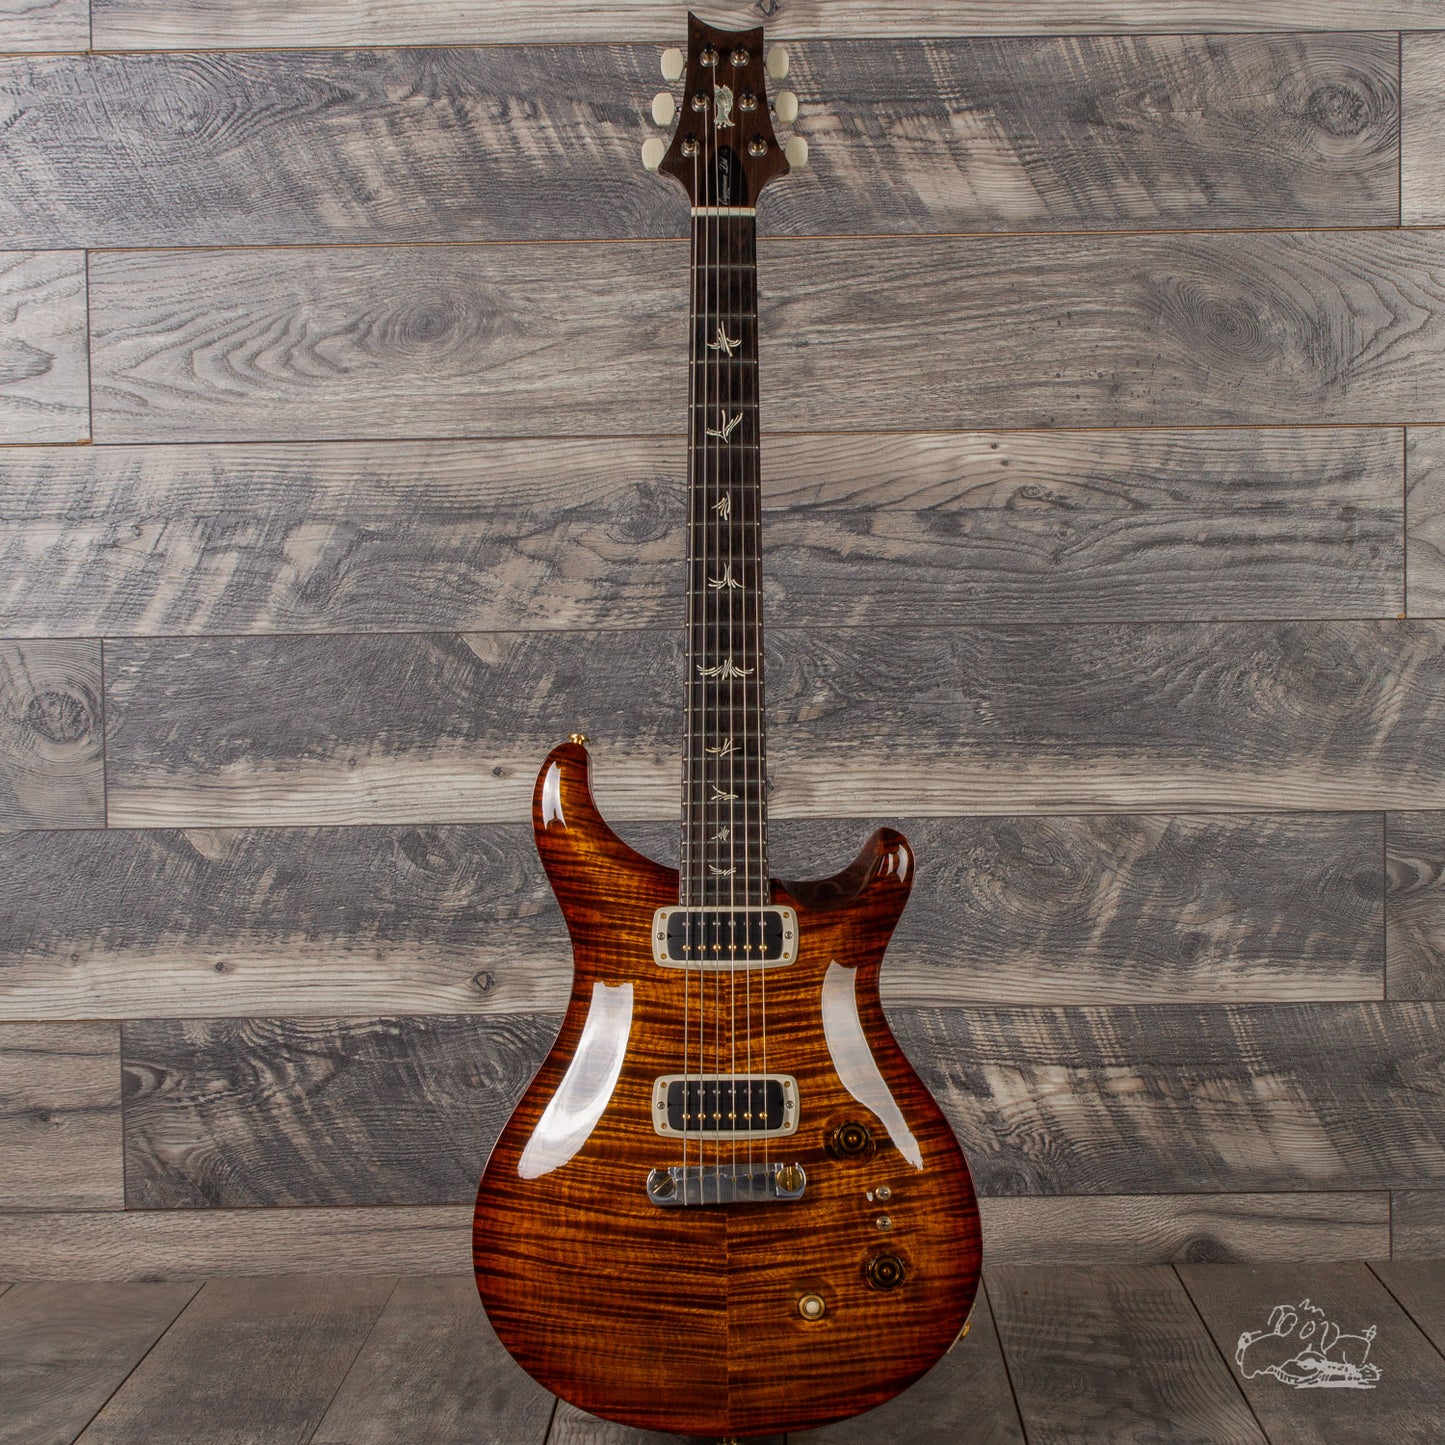 Paul's Guitar "Experience PRS" Limited Edition 2018